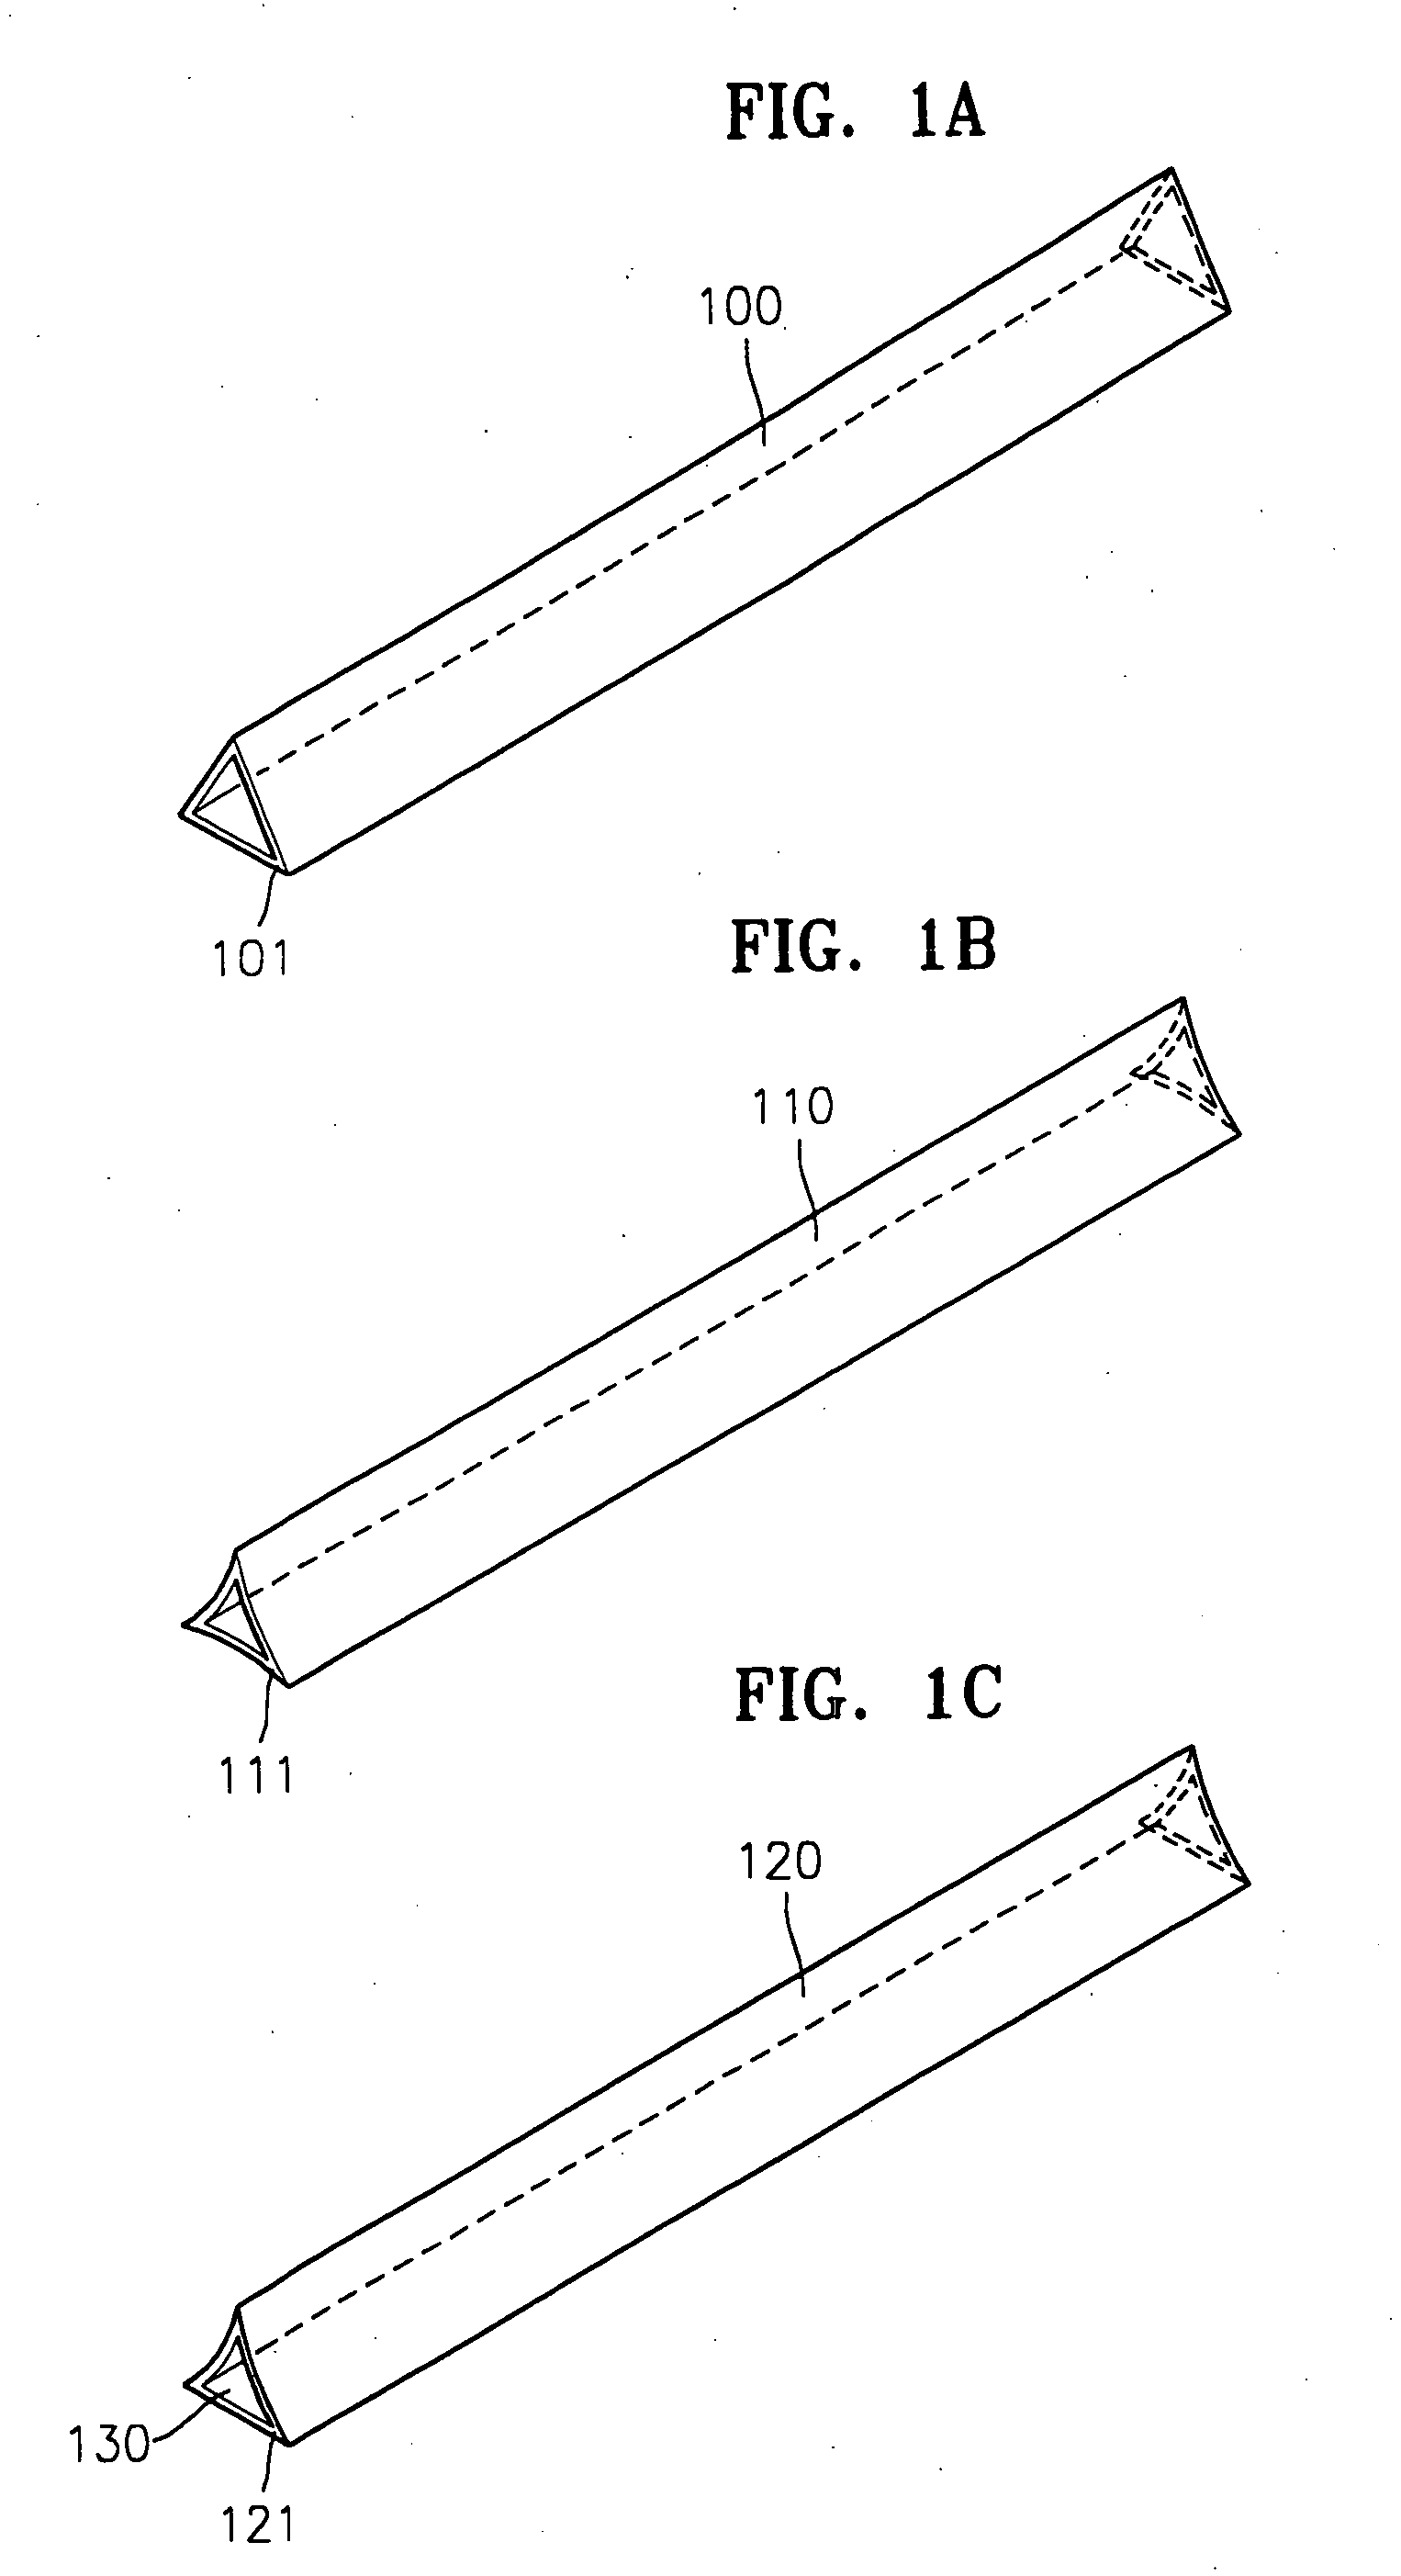 Micro heat pipe with pligonal cross-section manufactured via extrusion or drawing